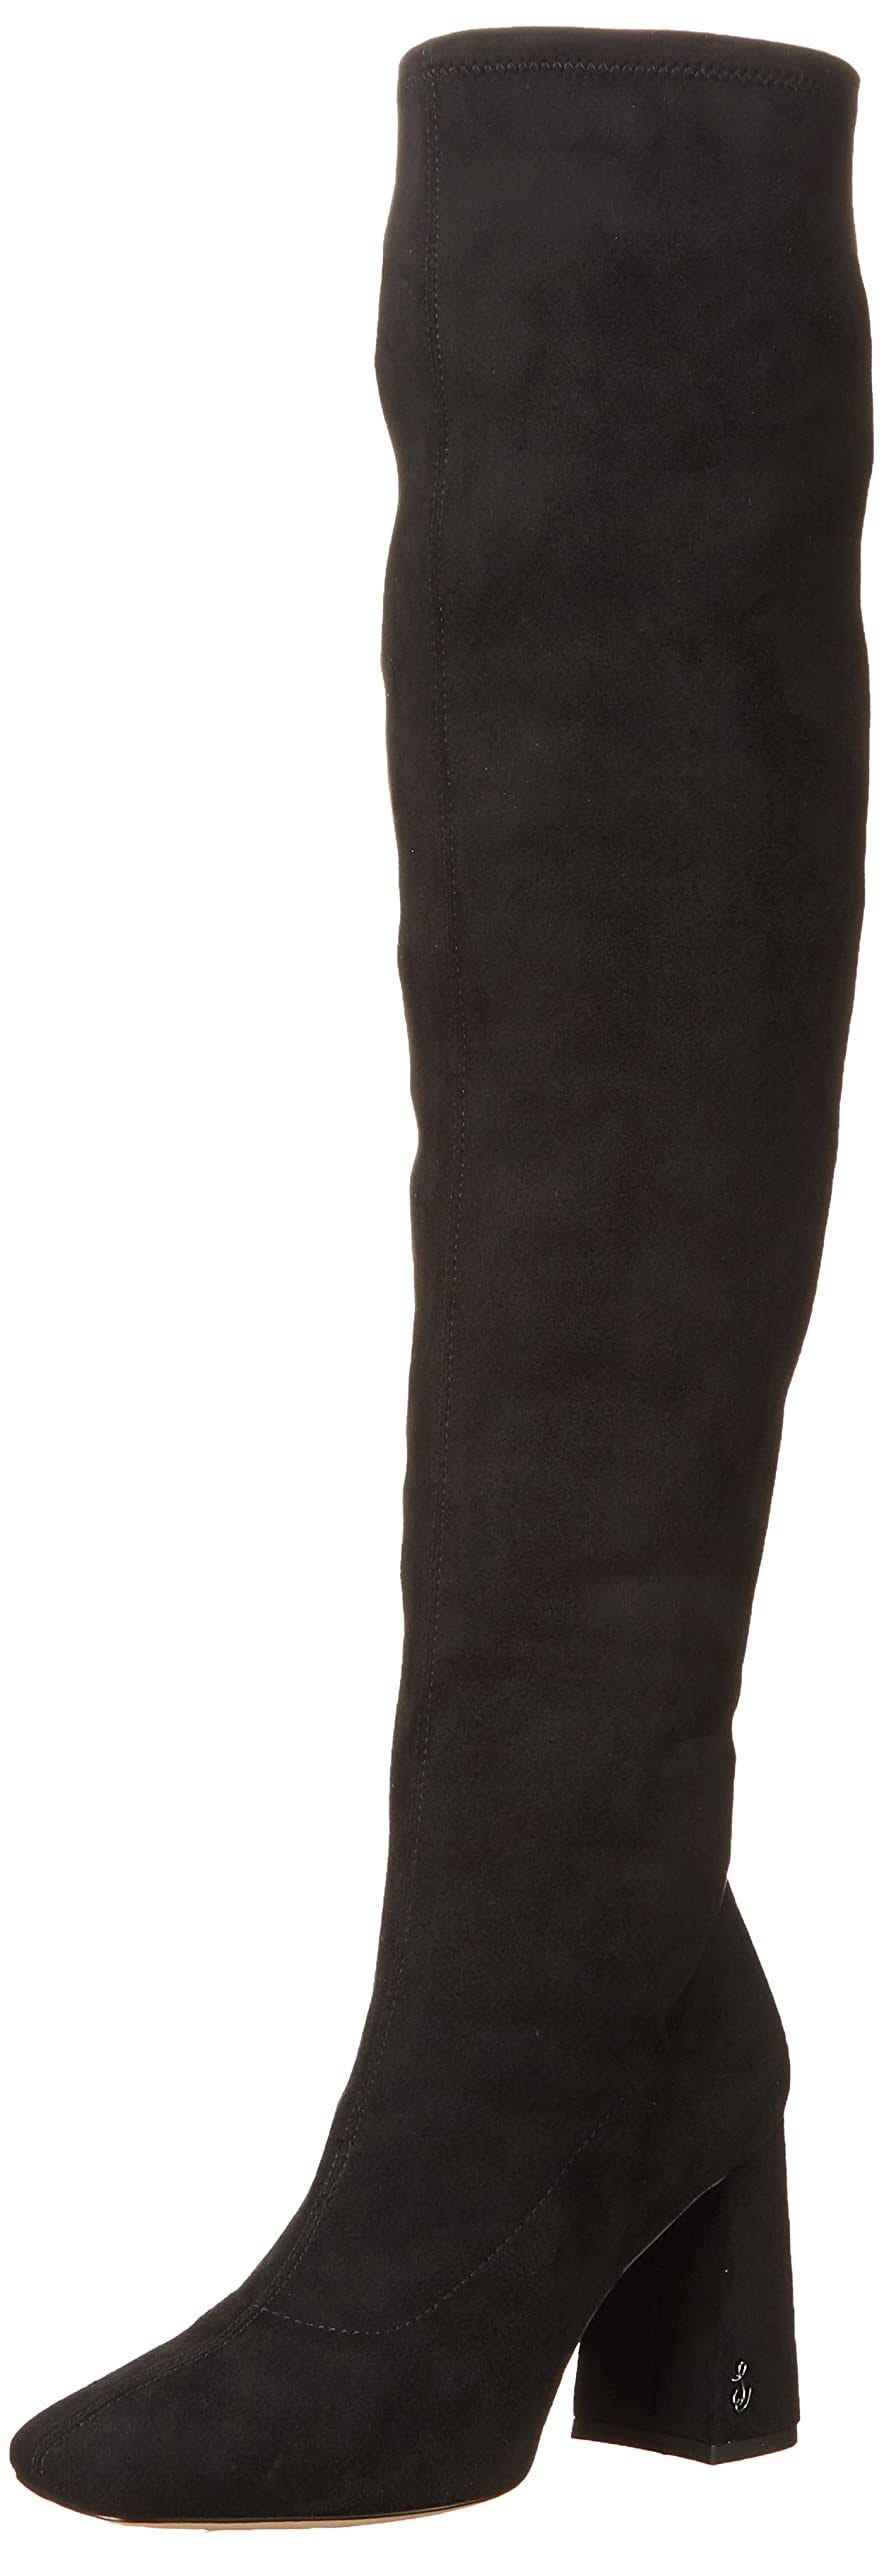 Black Suede Over-the-Knee Boot by Sam Edelman | Image